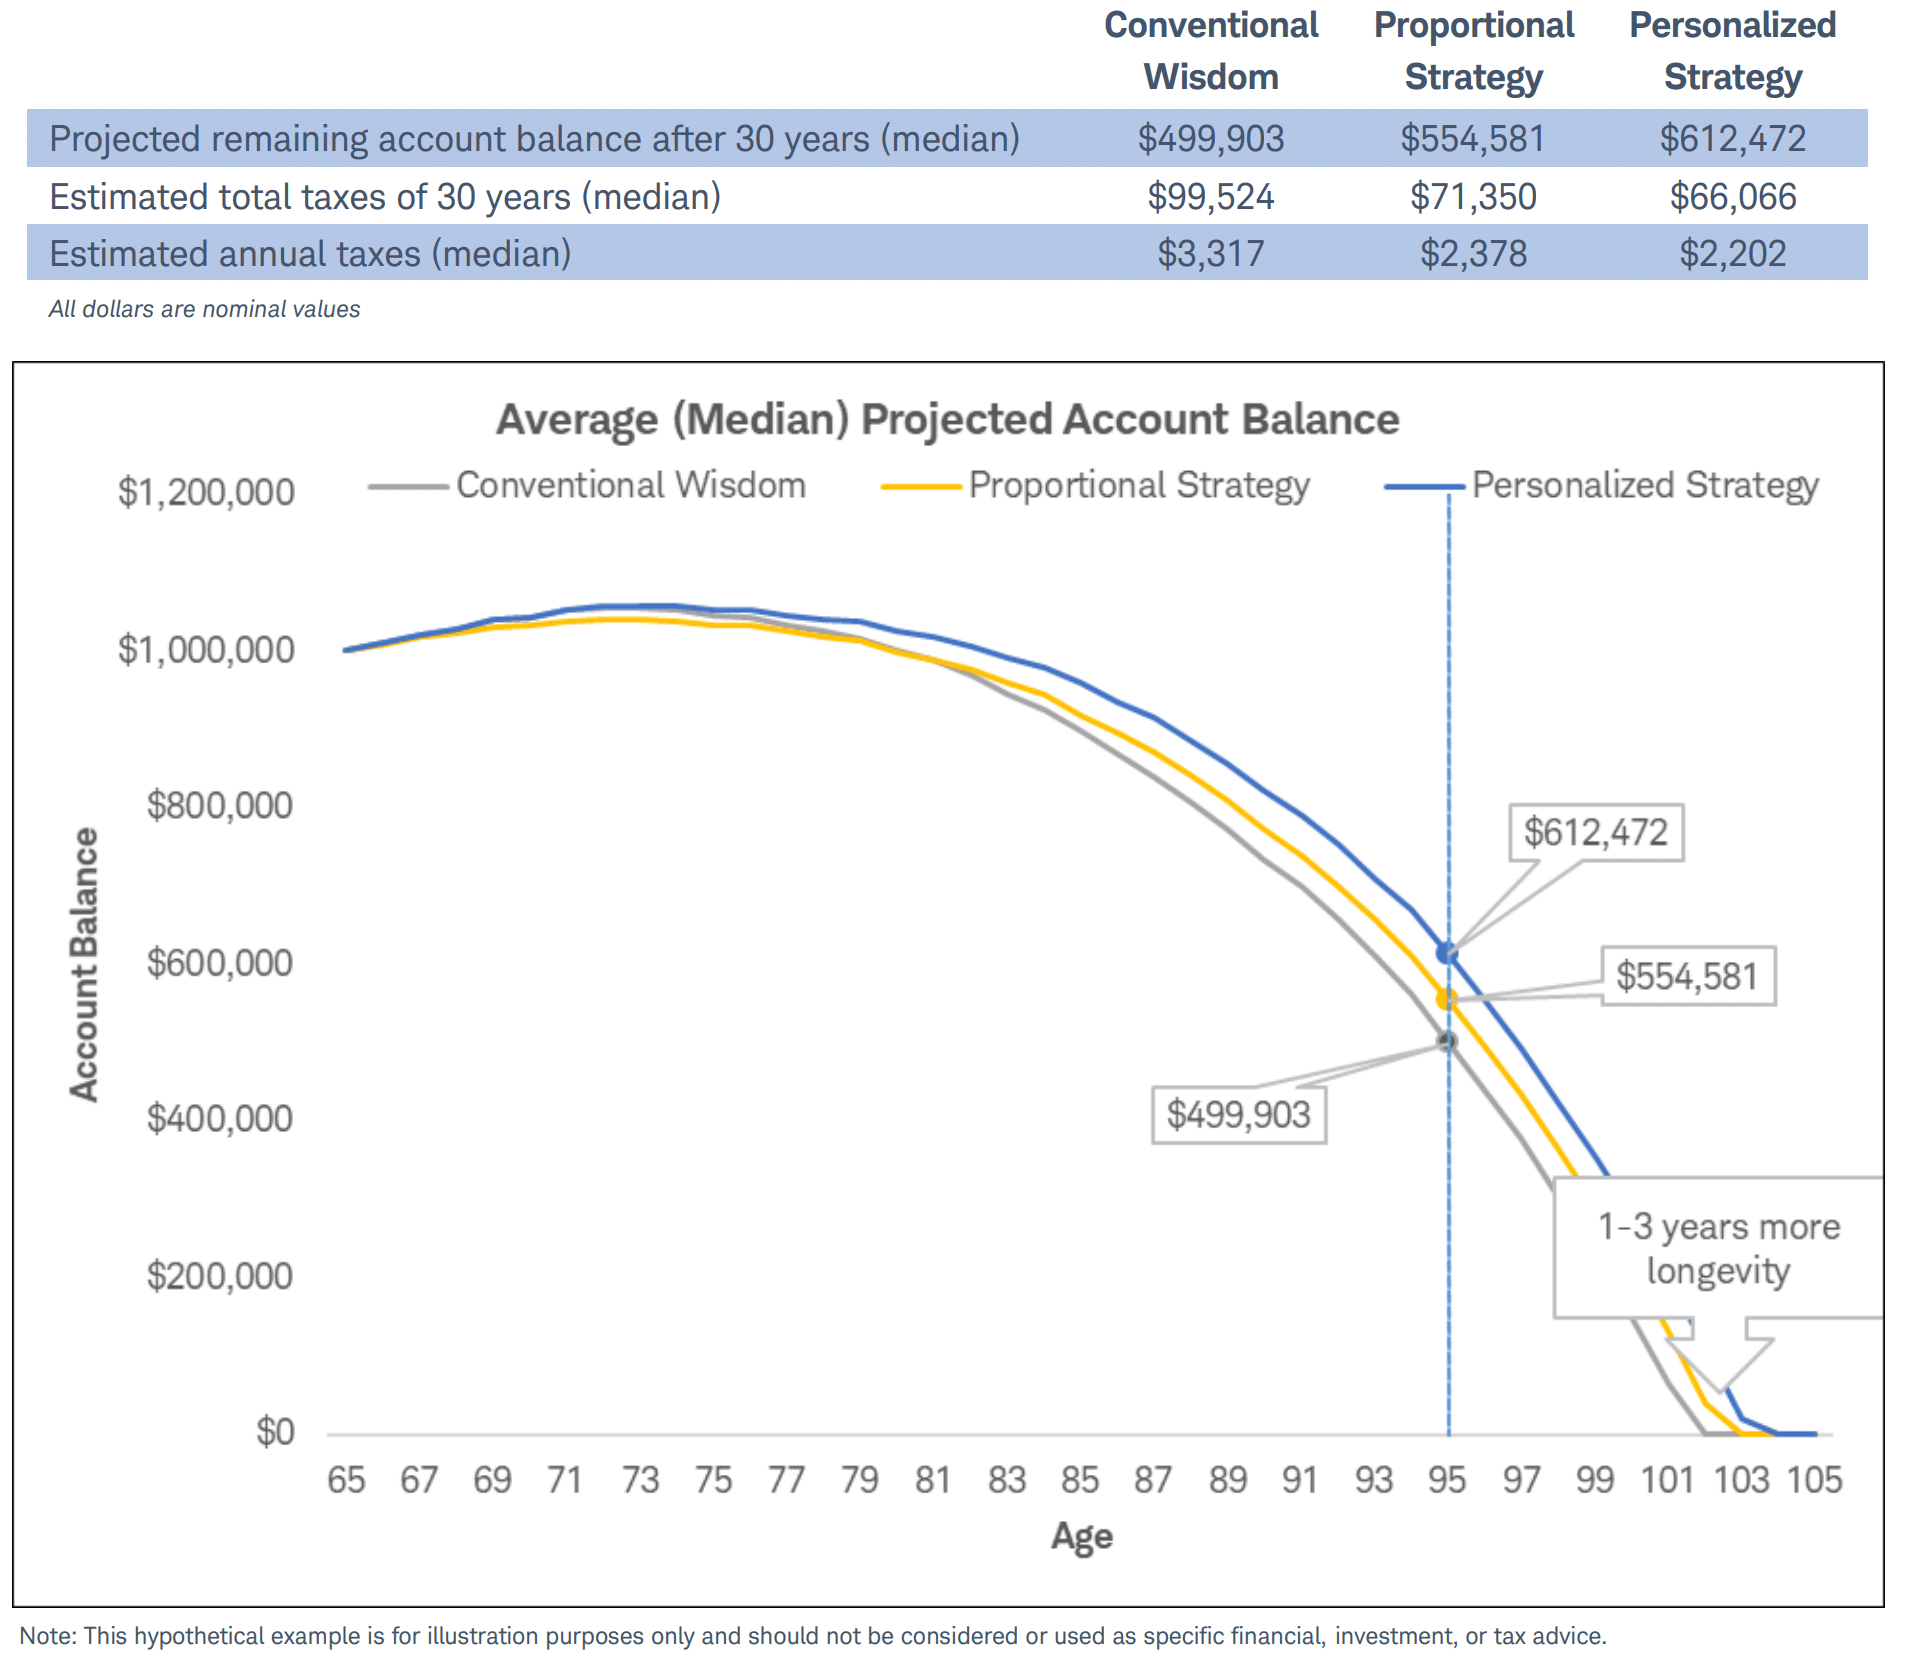 Median Projected Account Balance